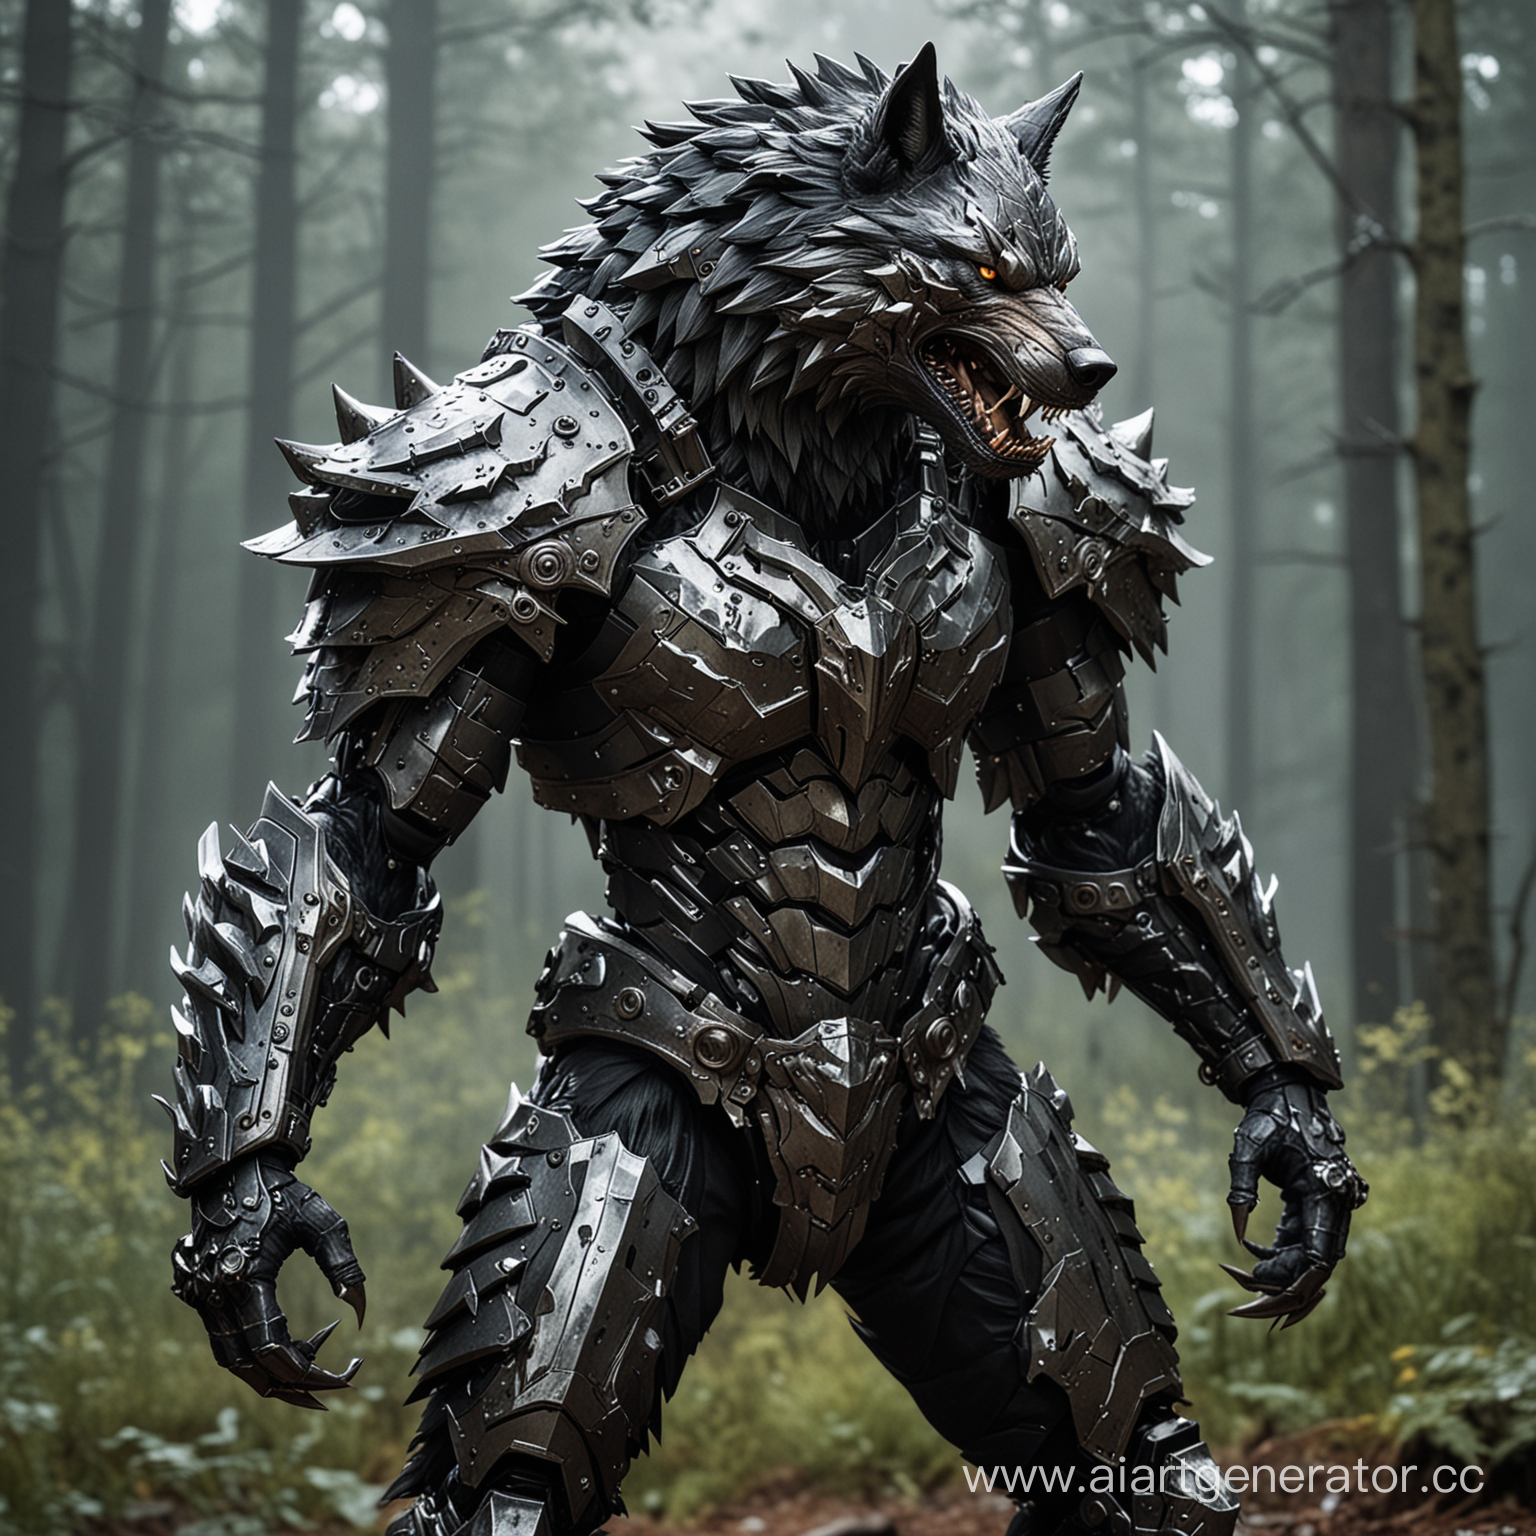 Havoc Hound: Feral fighter, with a suit resembling jagged metal armor, adorned with snarling wolf motifs and capable of transforming into a wolf-like form.make it cinematic 